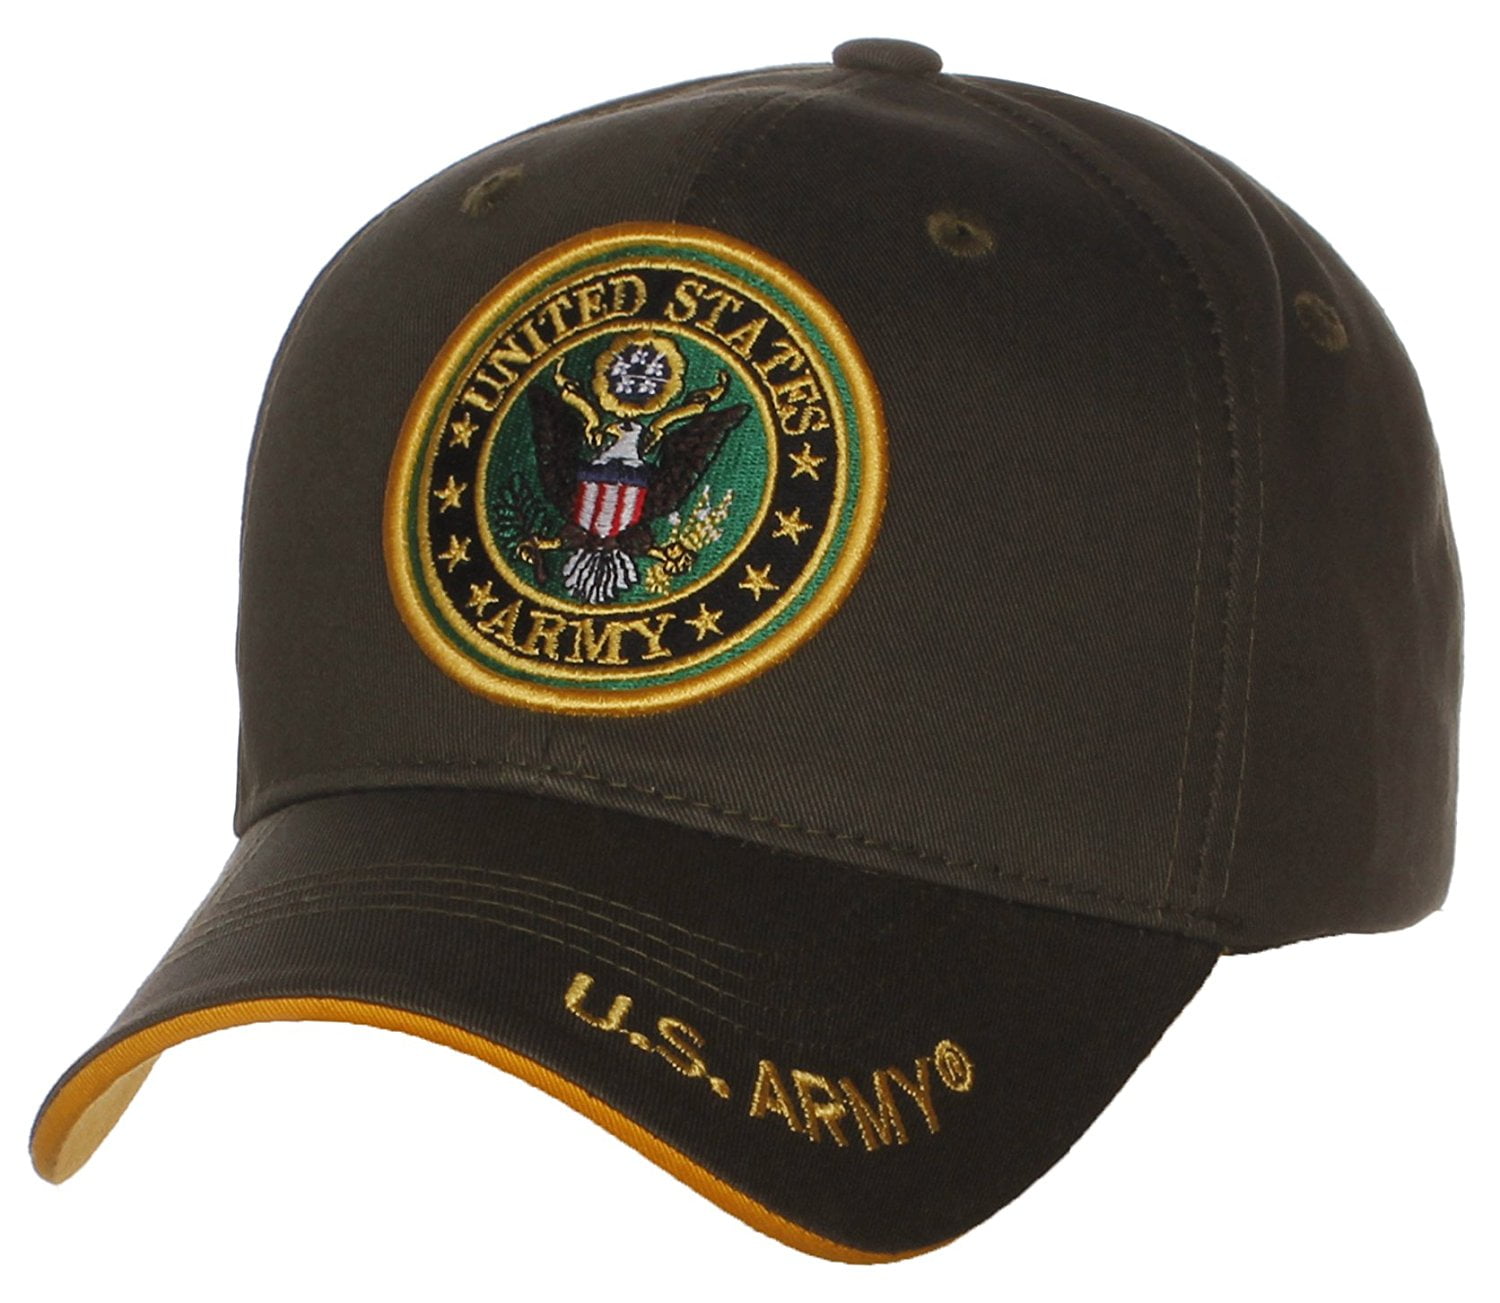 Respect Navy Seal Embroidery Embroidered Adjustable Hat Baseball Cap 